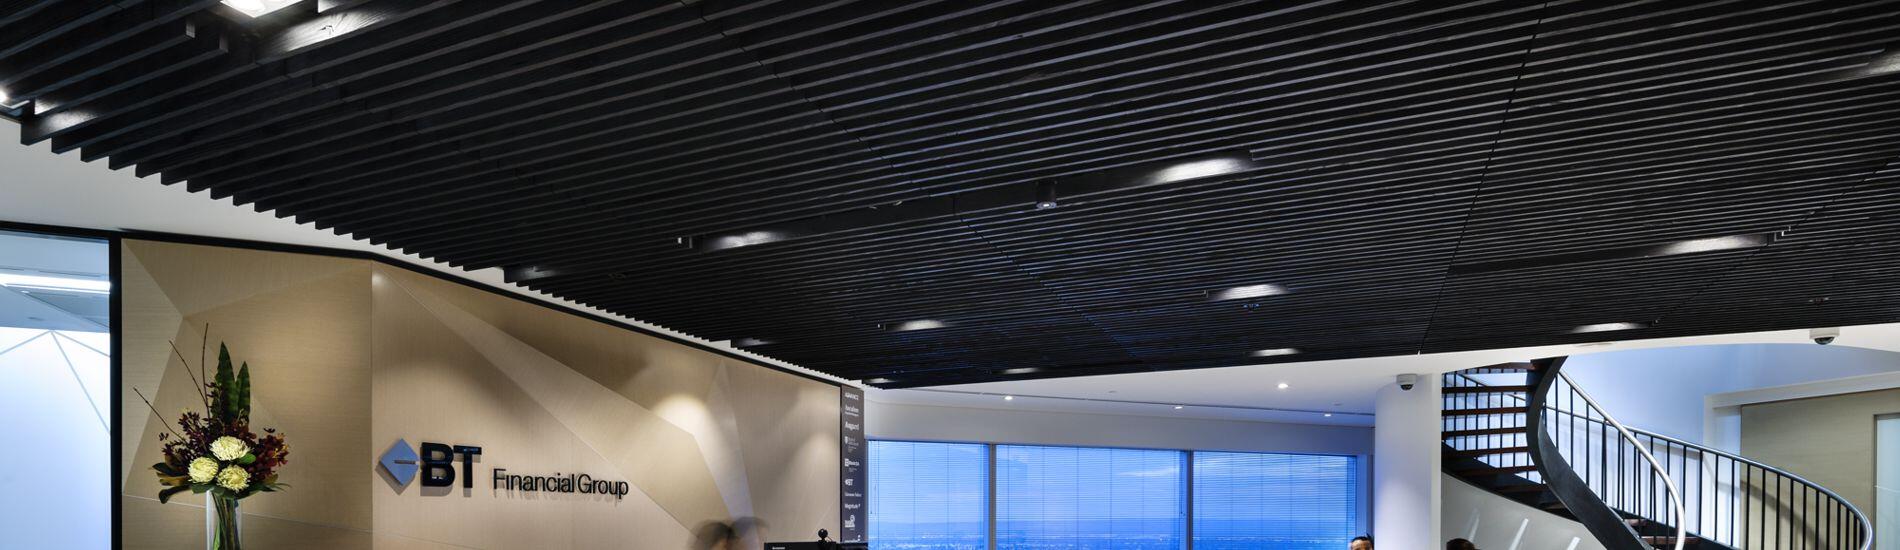 SUPATILE SLAT DRIFTWOOD Rustic Slatted Ceiling Tiles Used in Contemporary Workplace